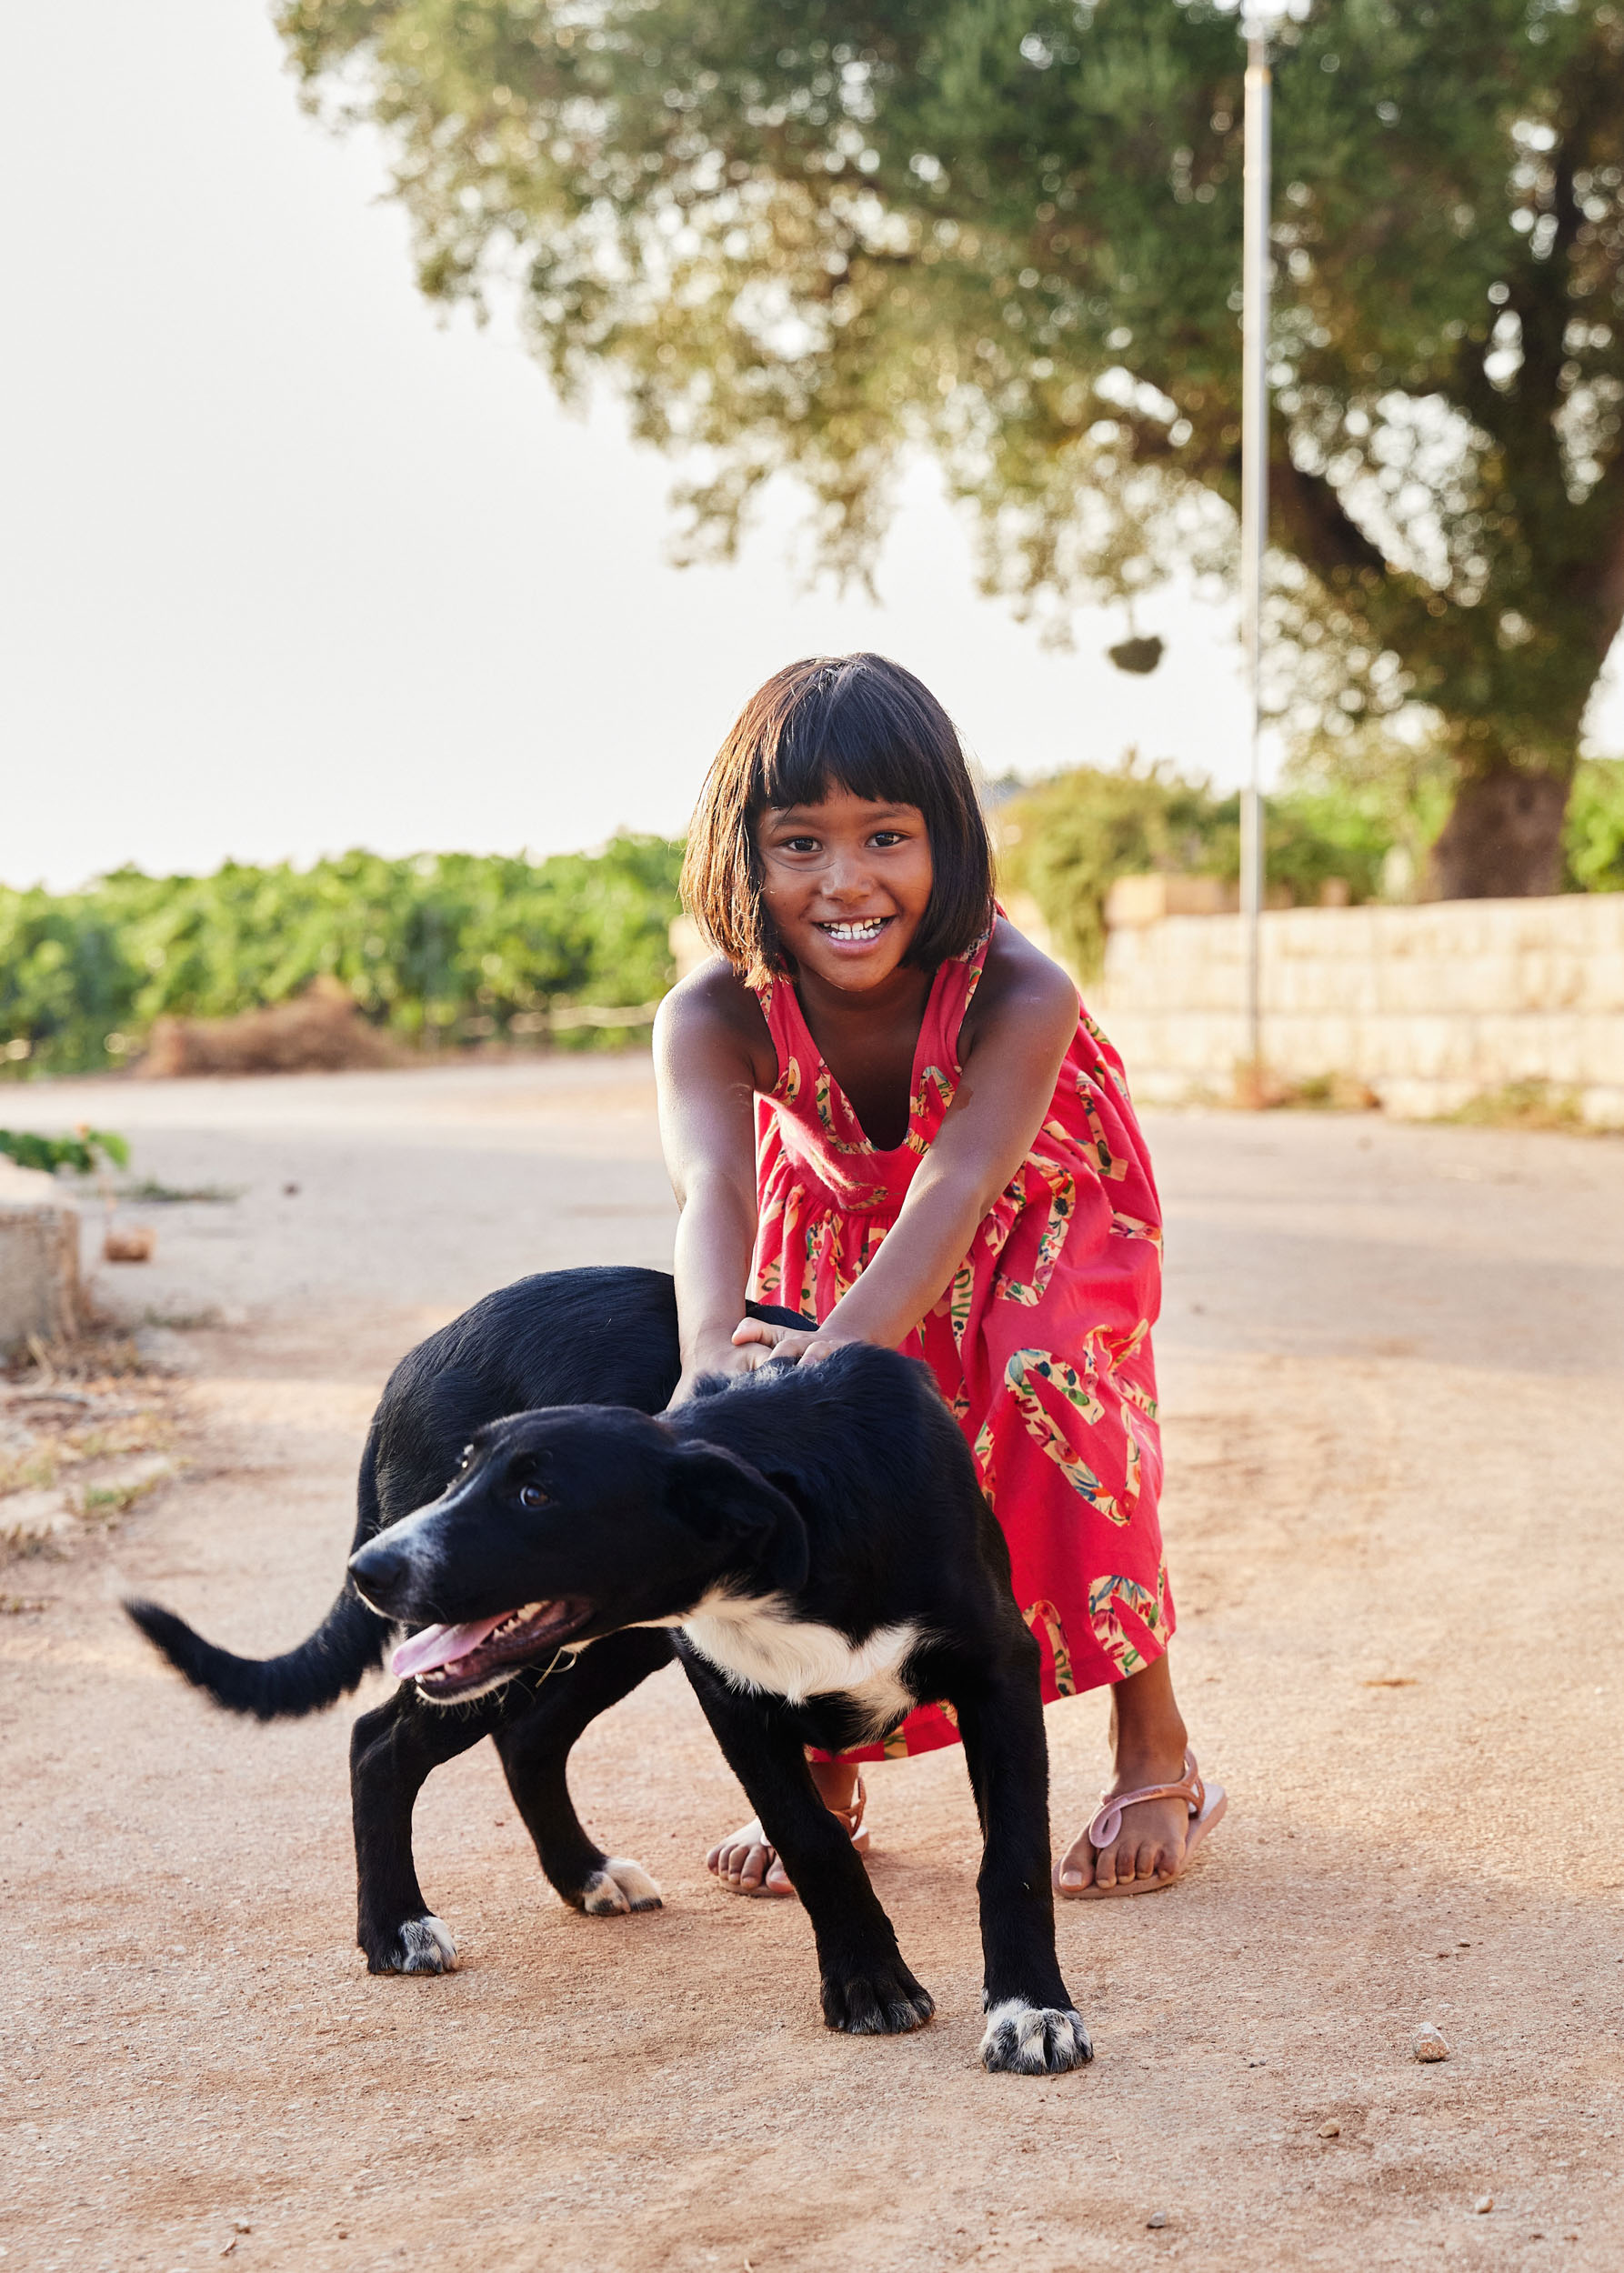 Girl and Dog in vineyard in Mallorca, Spain by photographer Nico Schinco